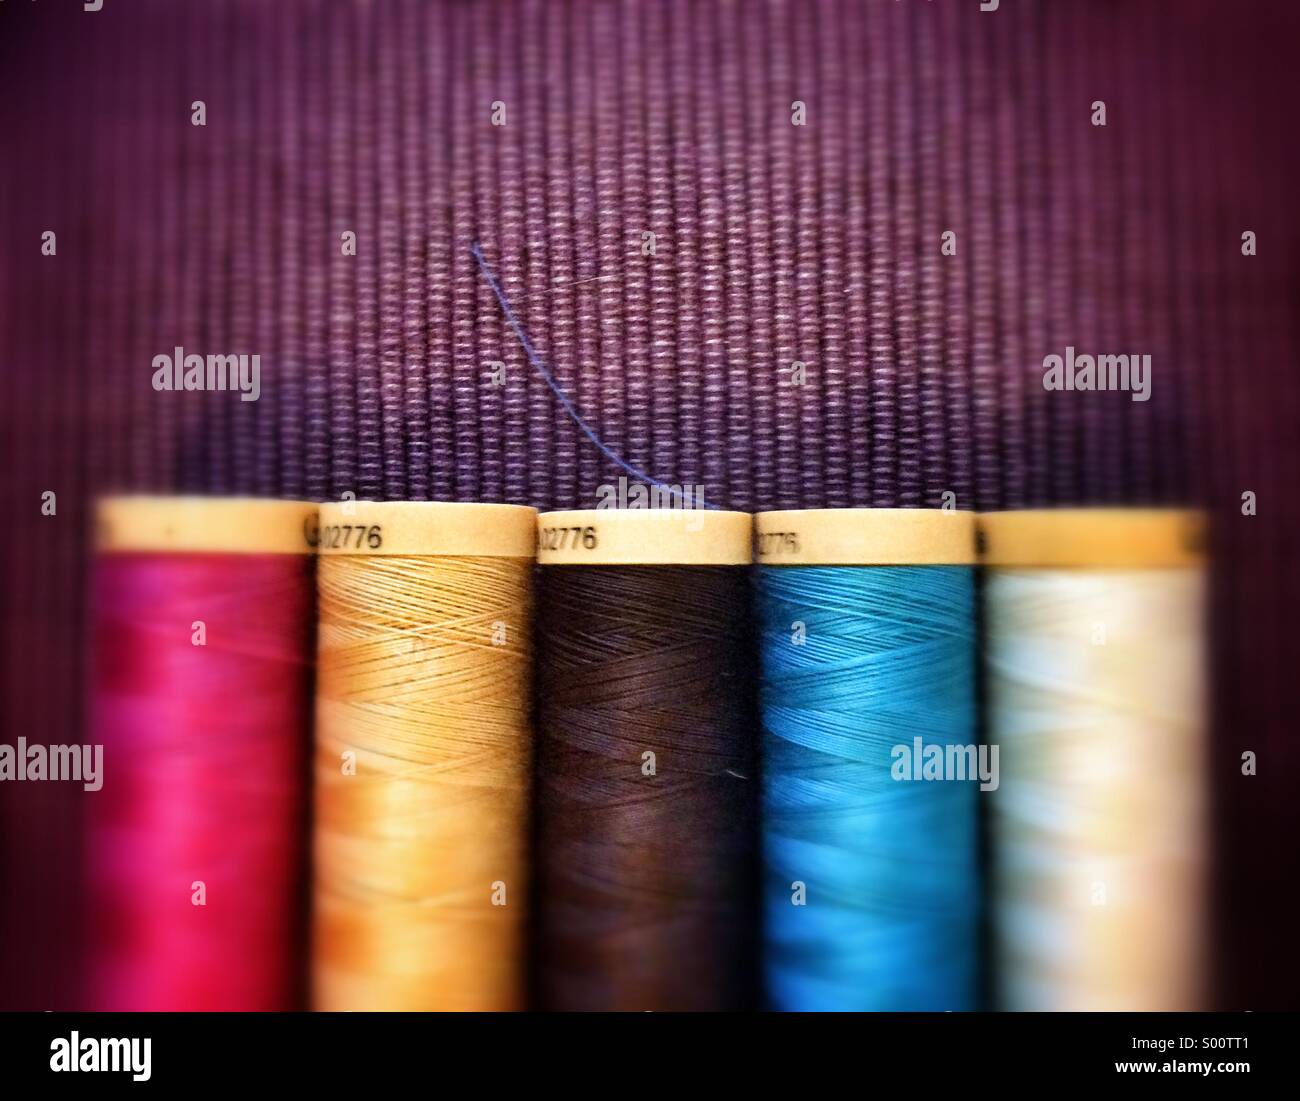 Sewing thread reels Stock Photo